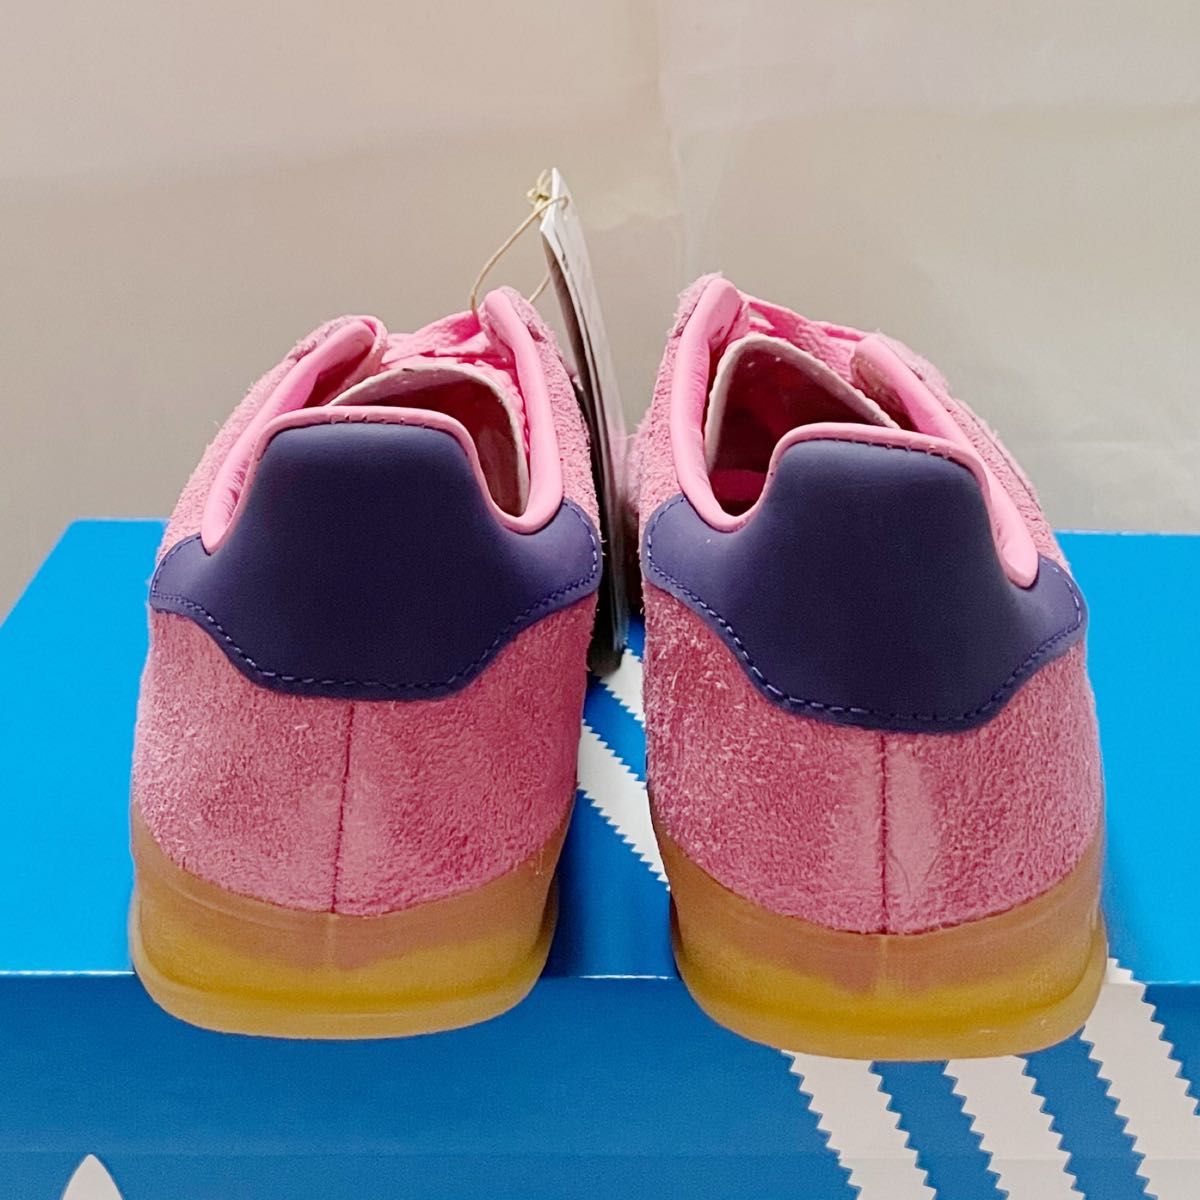 adidas Gazelle Indoor Bliss Pink ガゼル ピンク